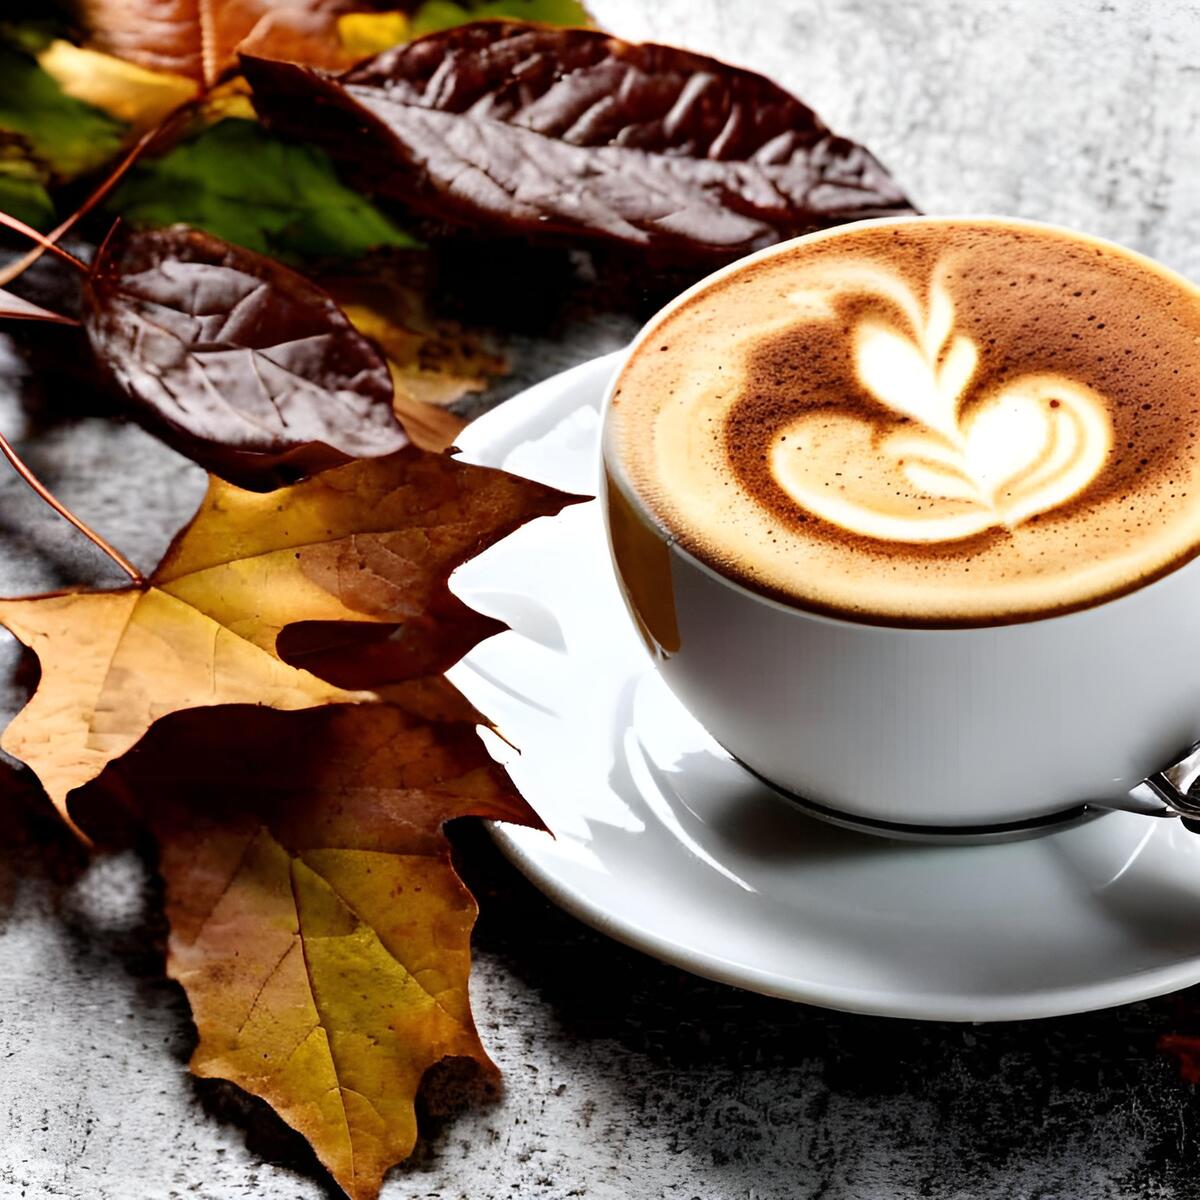 A cup of coffee next to the autumn leaves